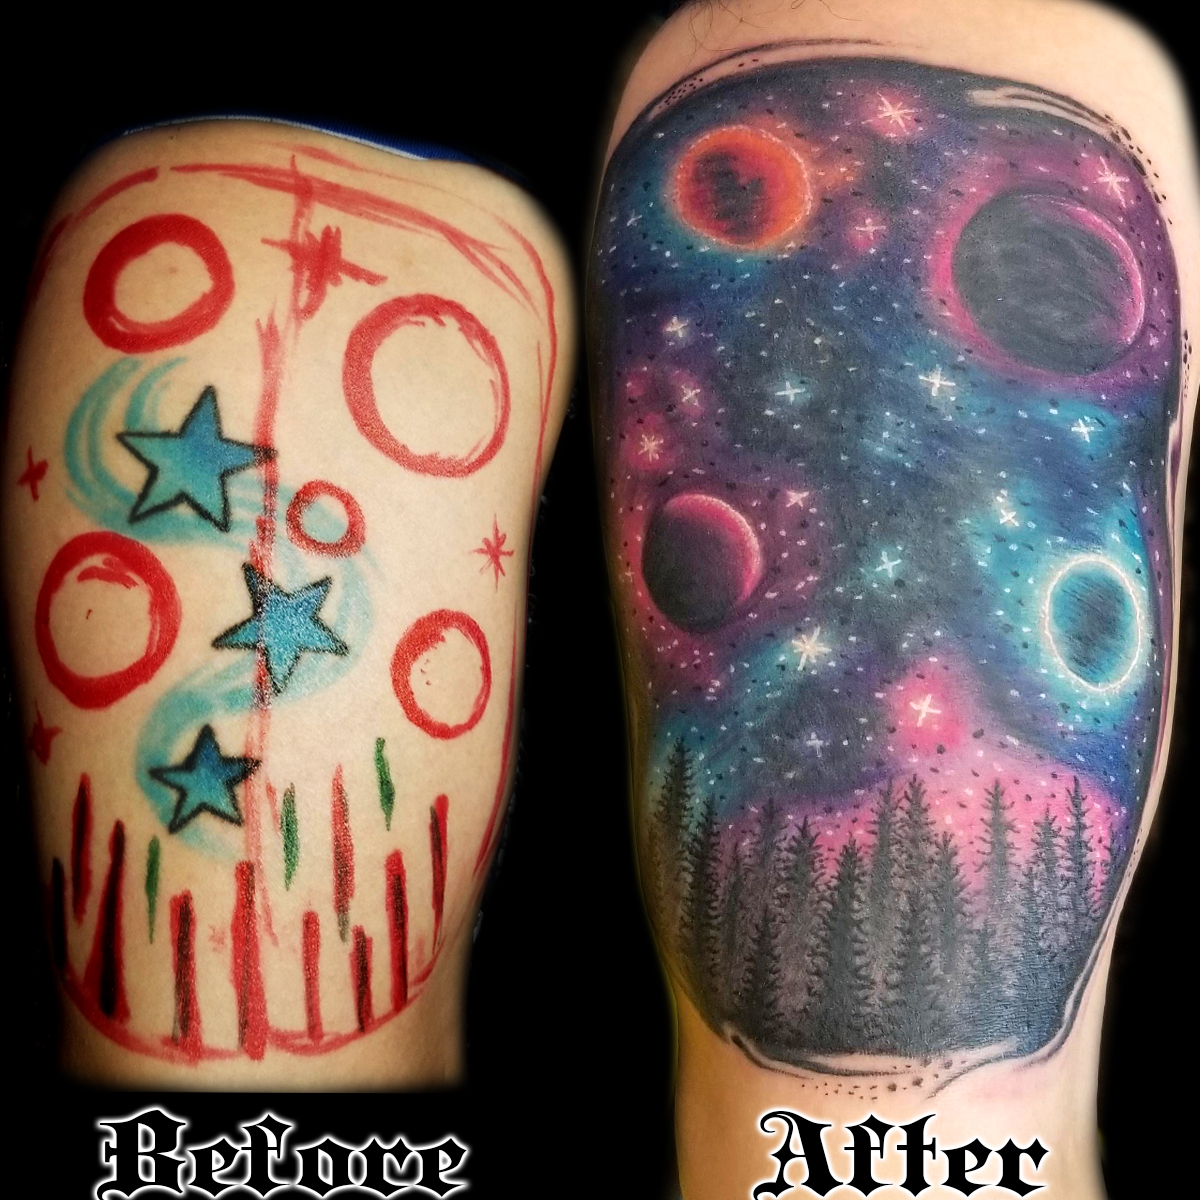 Hand poked galaxy tattoo on the left inner forearm.